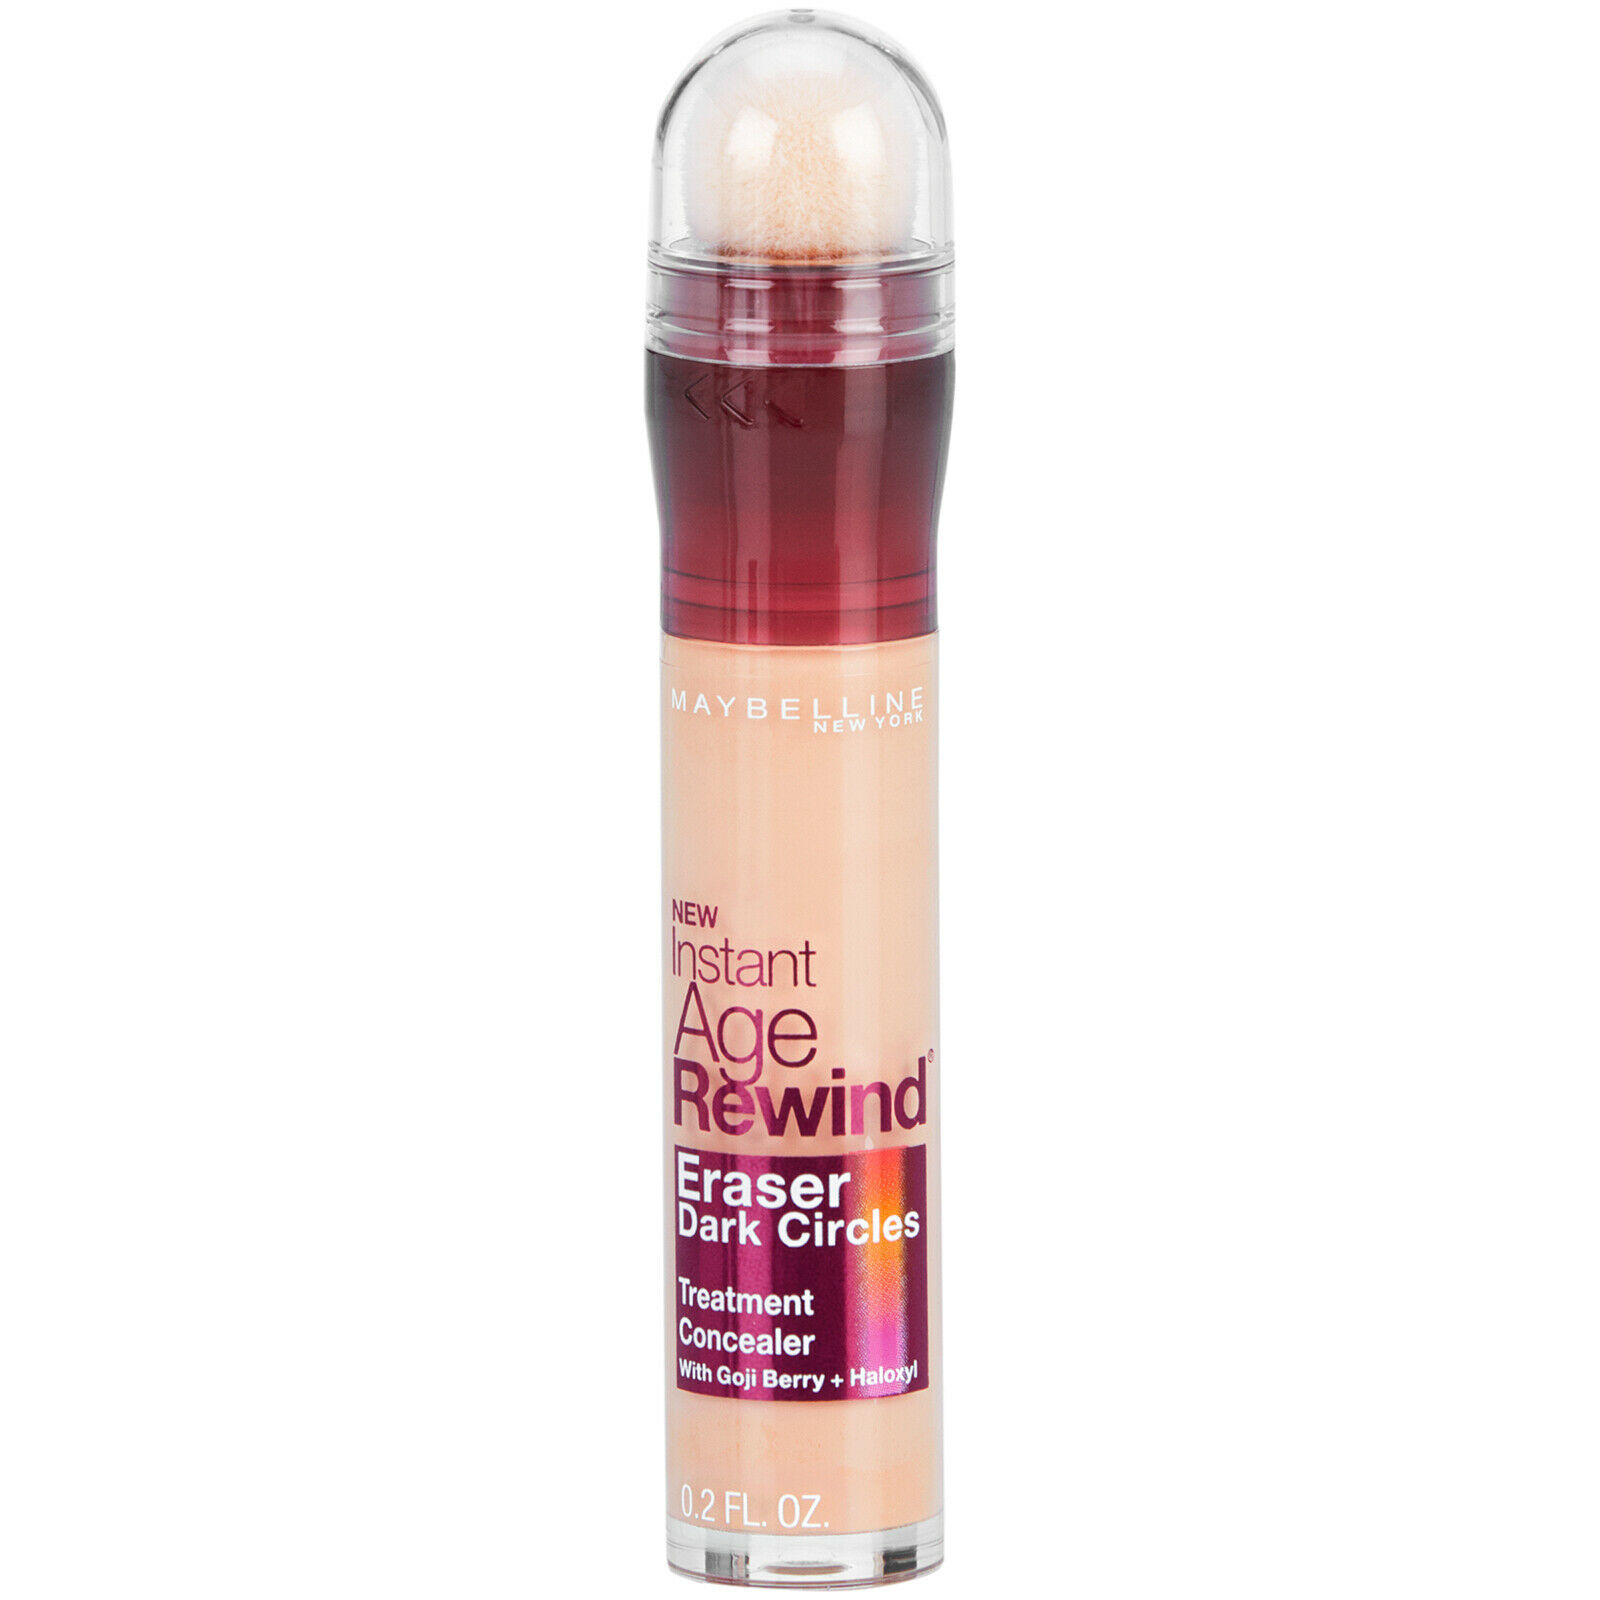 MAYBELLINE MB ROSTRO CORRECTOR AGEREWIND 142